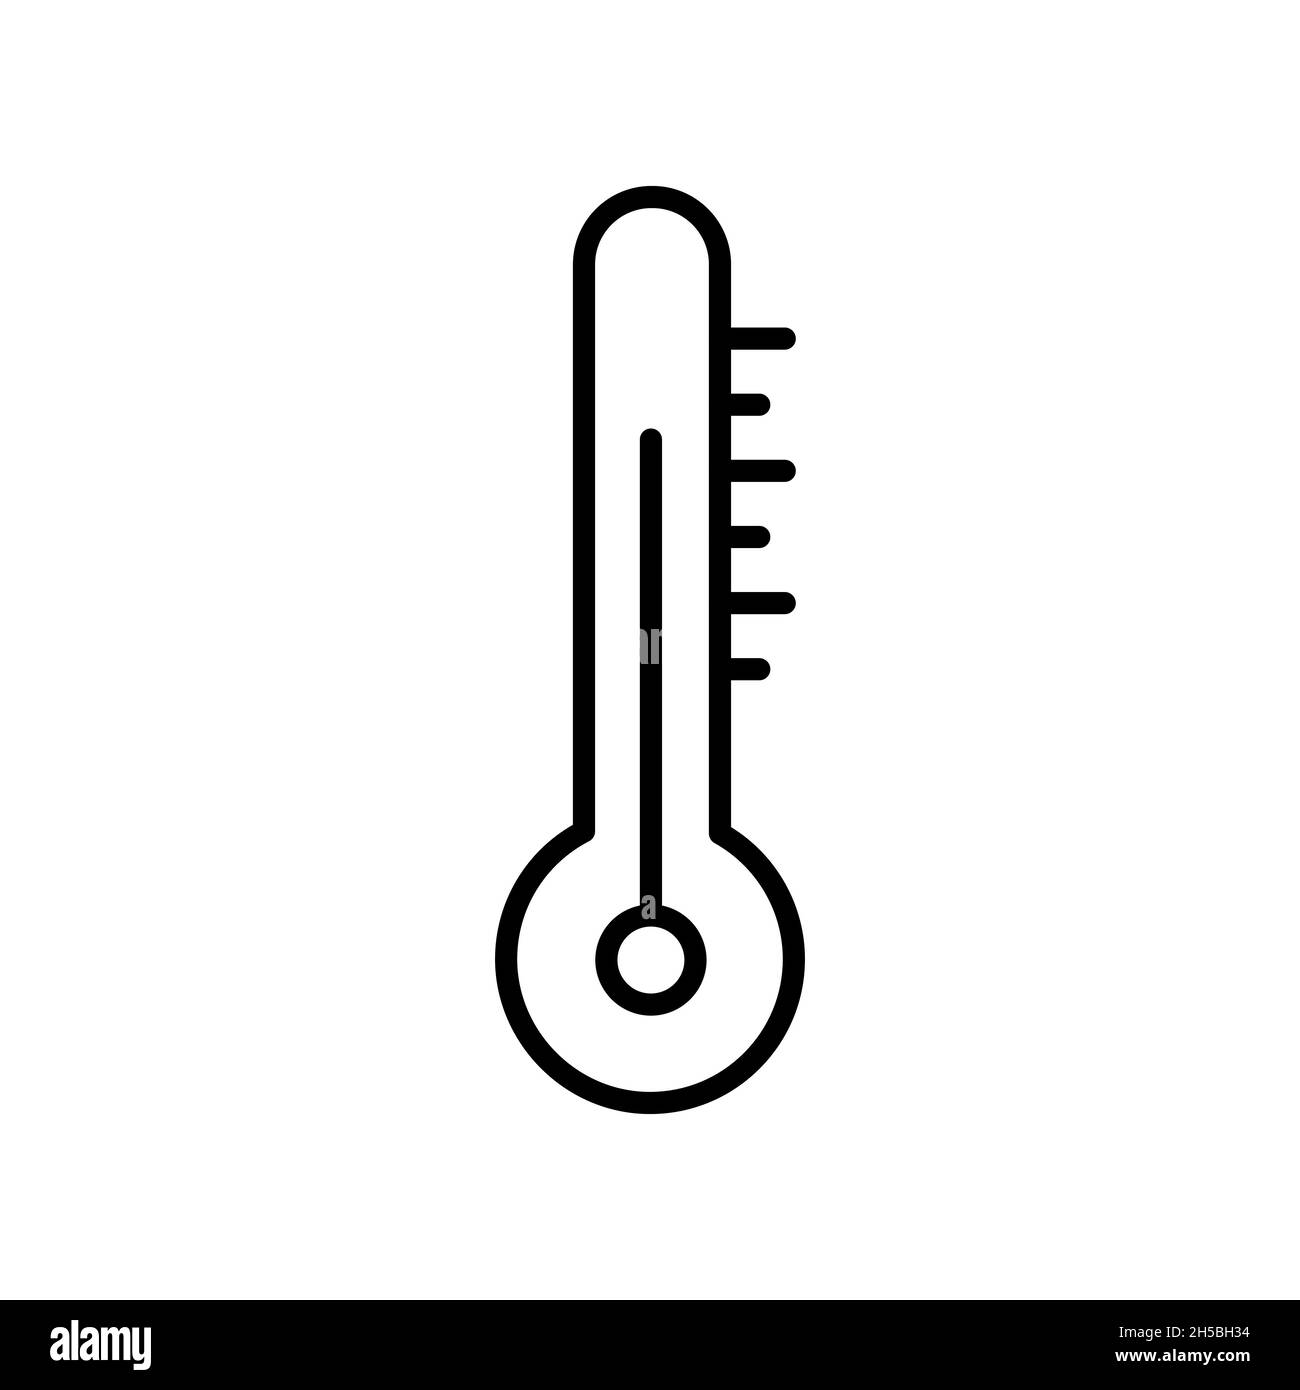 Thermometer icon. Thermometer linear icon. Vector illustration. Black thermometer icon. Thermometer sign Stock Vector